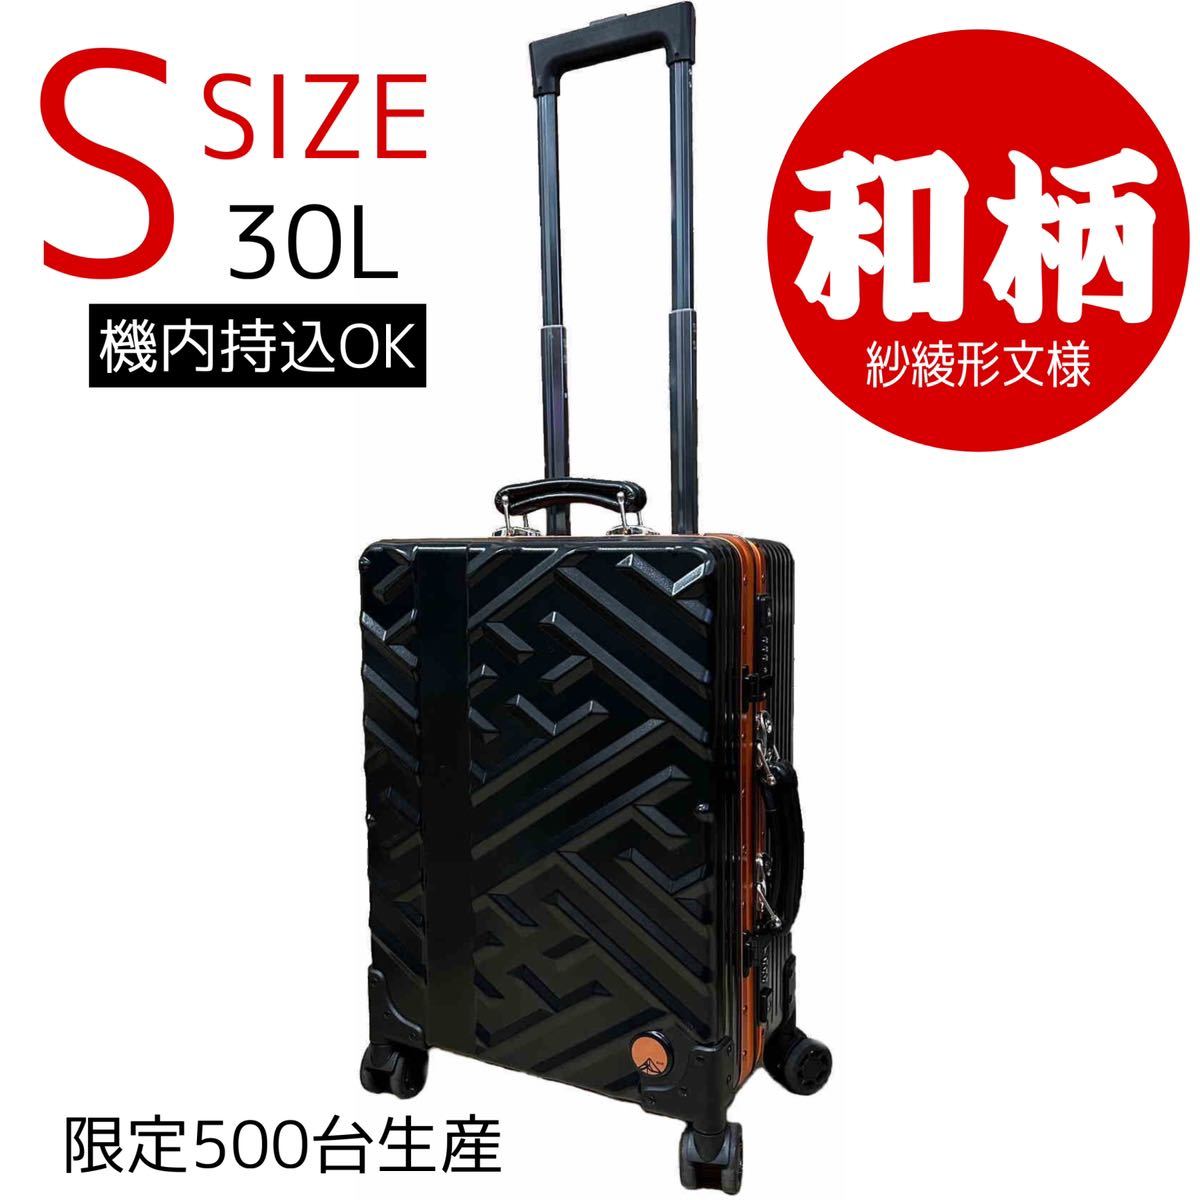  peace pattern suitcase approximately 30L machine inside bring-your-own type carry bag Carry case TSA lock black 